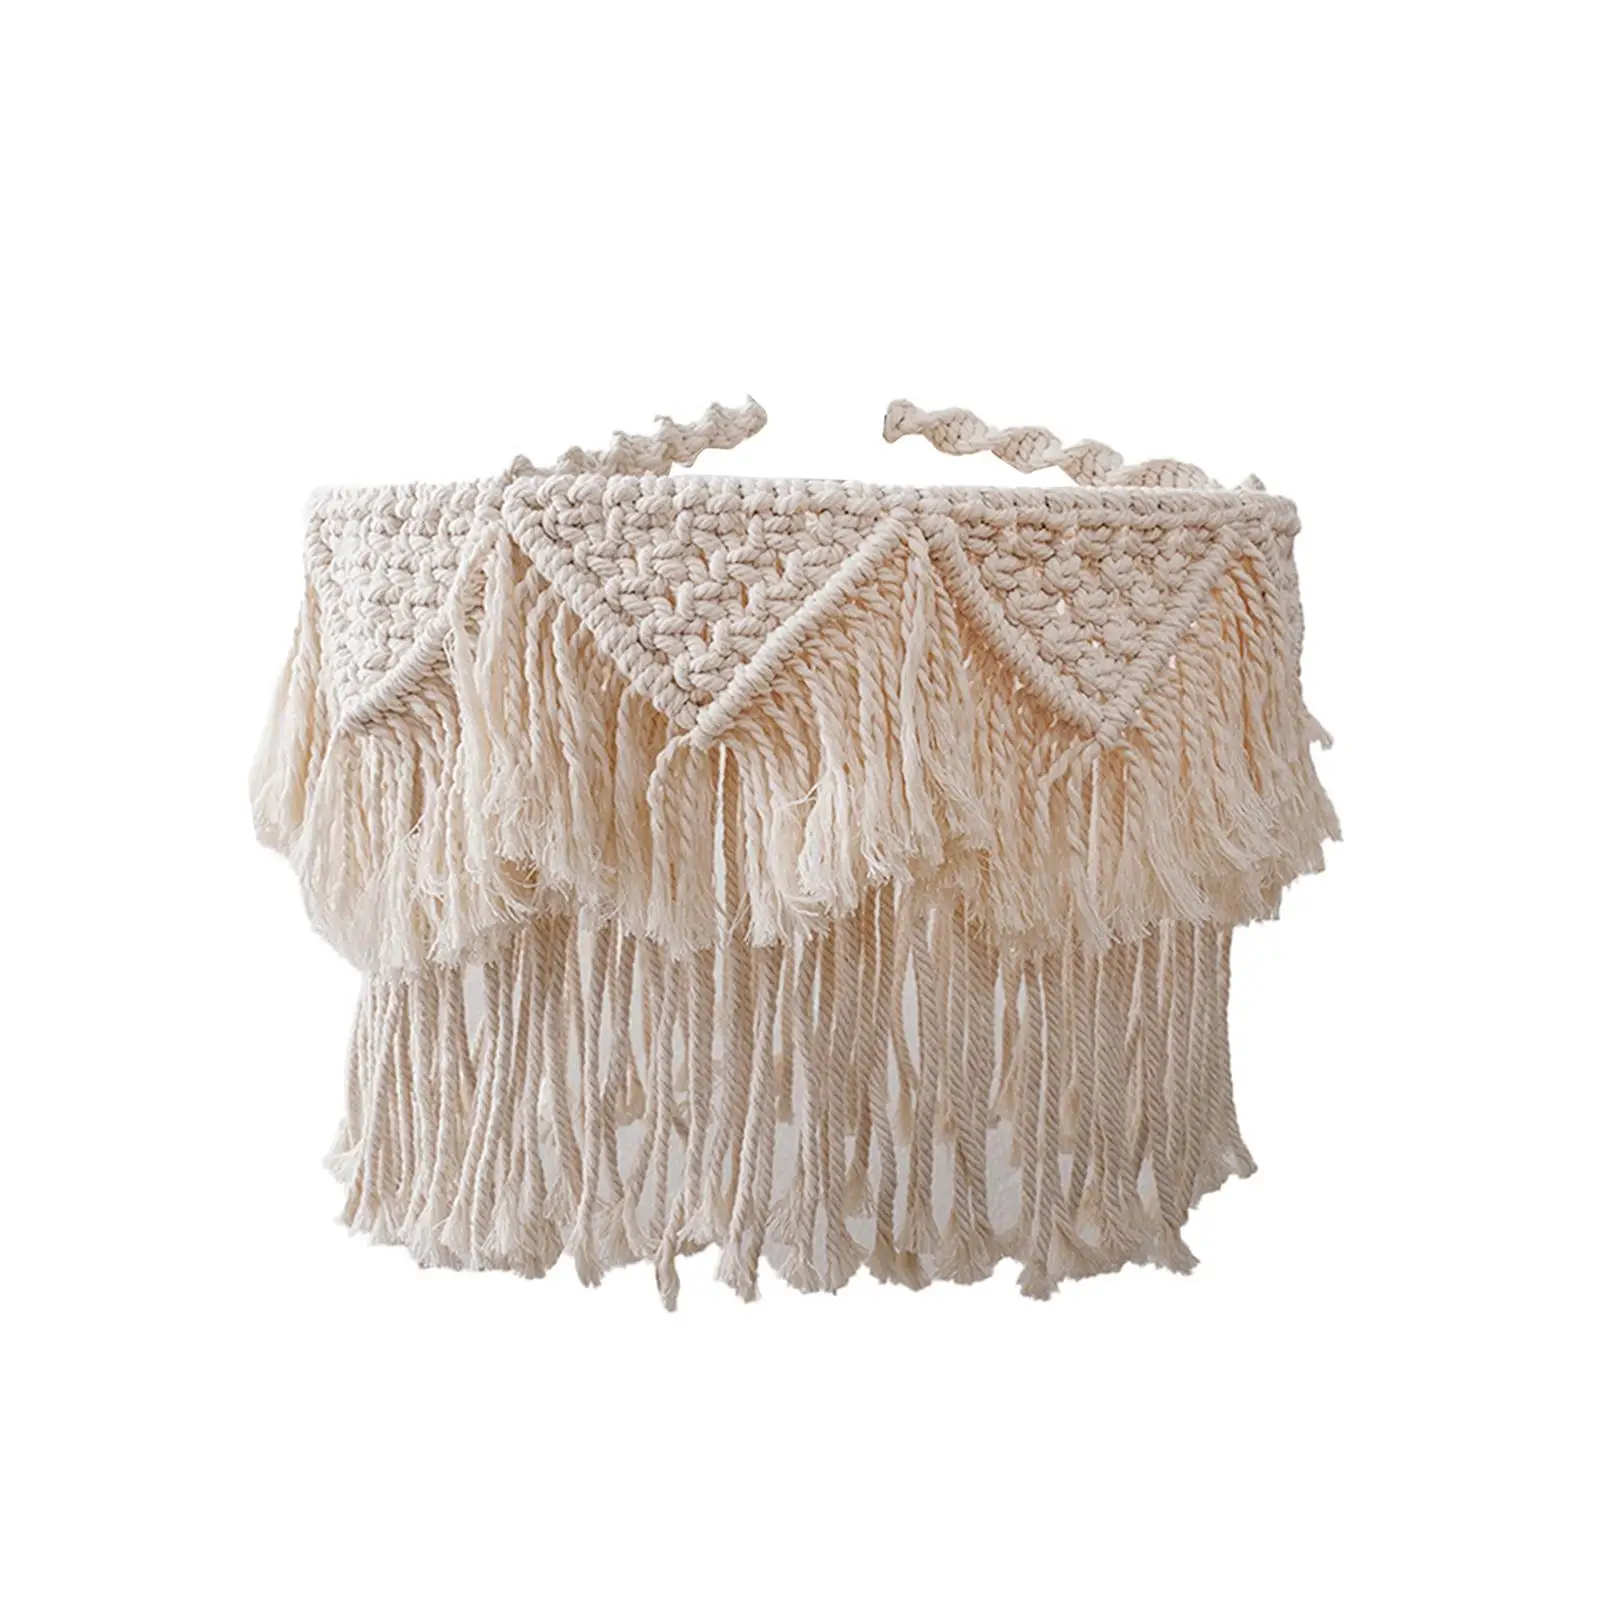 Macrame Lamp Shade Bohemian Hand Woven Light Cover Pendant Light Shade Only Lampshade for Home Wedding Bedroom Decoration